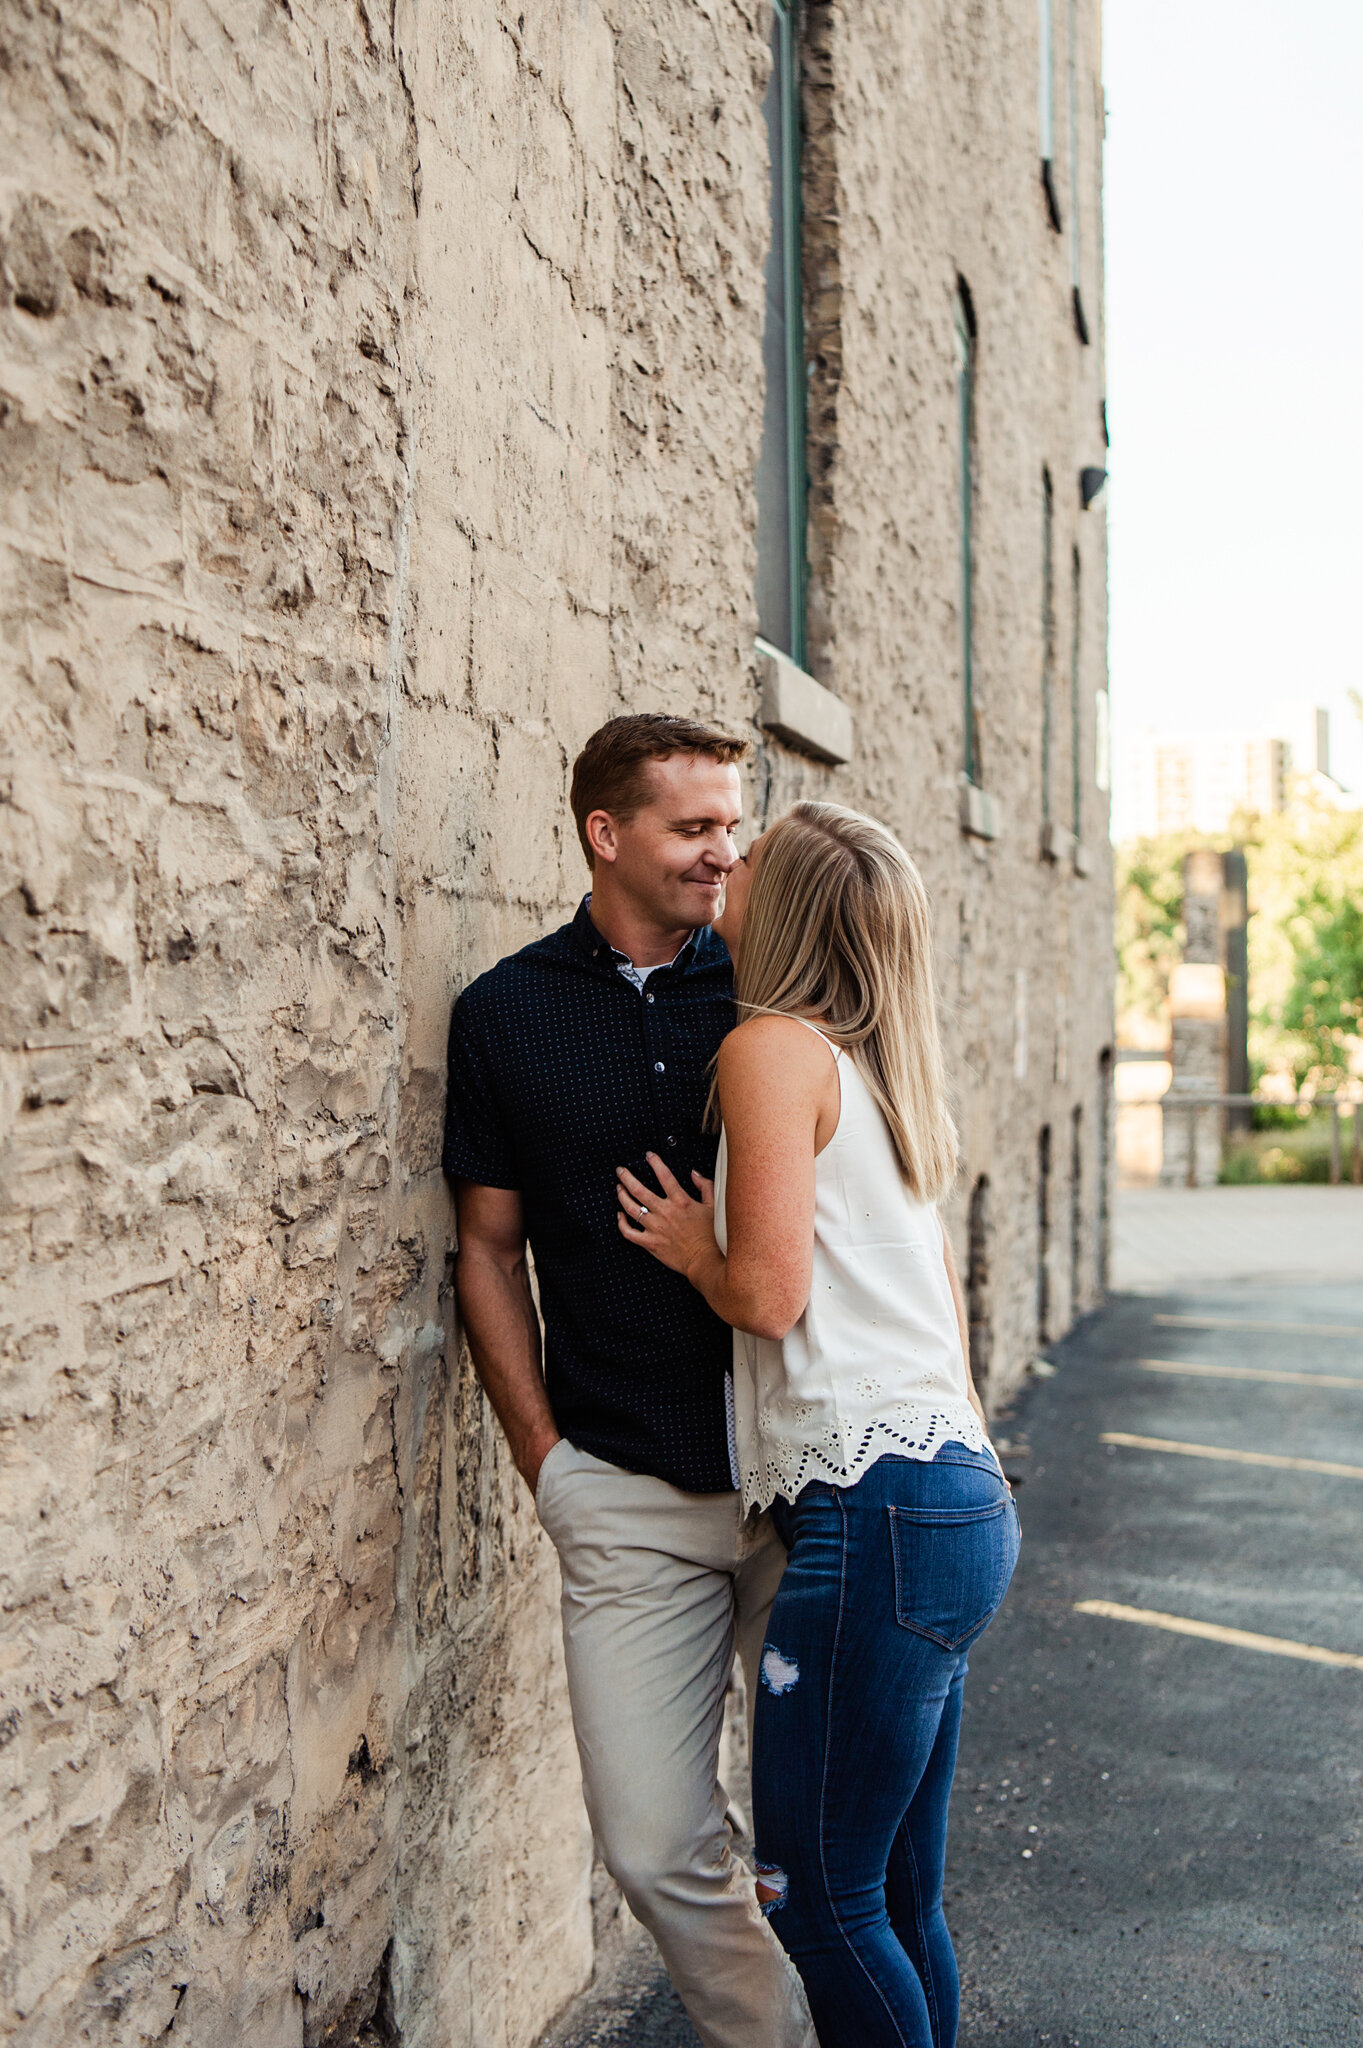 Genesee_Brew_House_High_Falls_Rochester_Engagement_Session_JILL_STUDIO_Rochester_NY_Photographer_5553.jpg